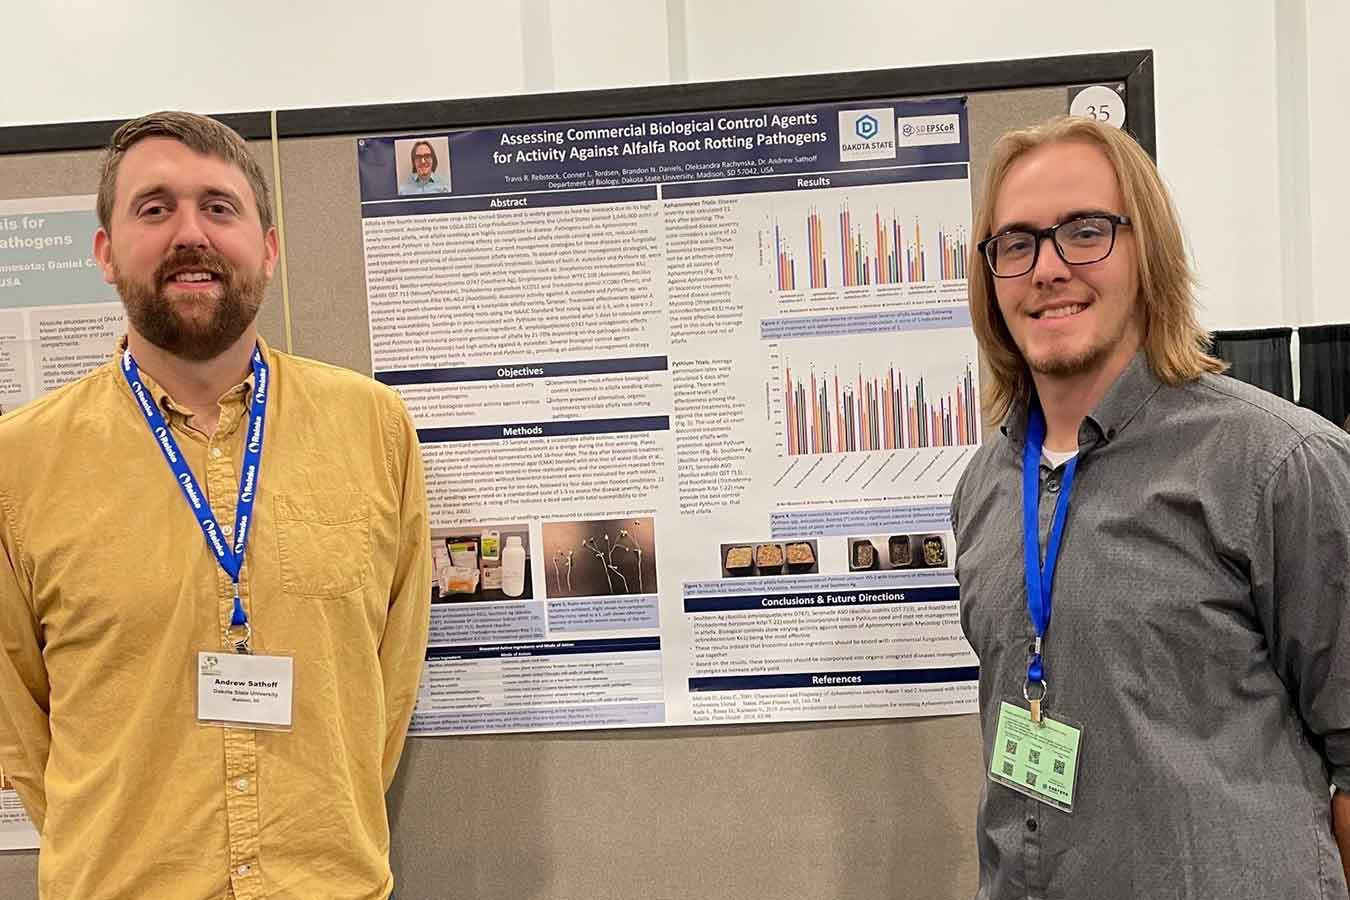 (l-to-r) Dr. Andrew Sathoff and Biology student Travis Rebstock pose for a photo at the World Alfalfa Congress